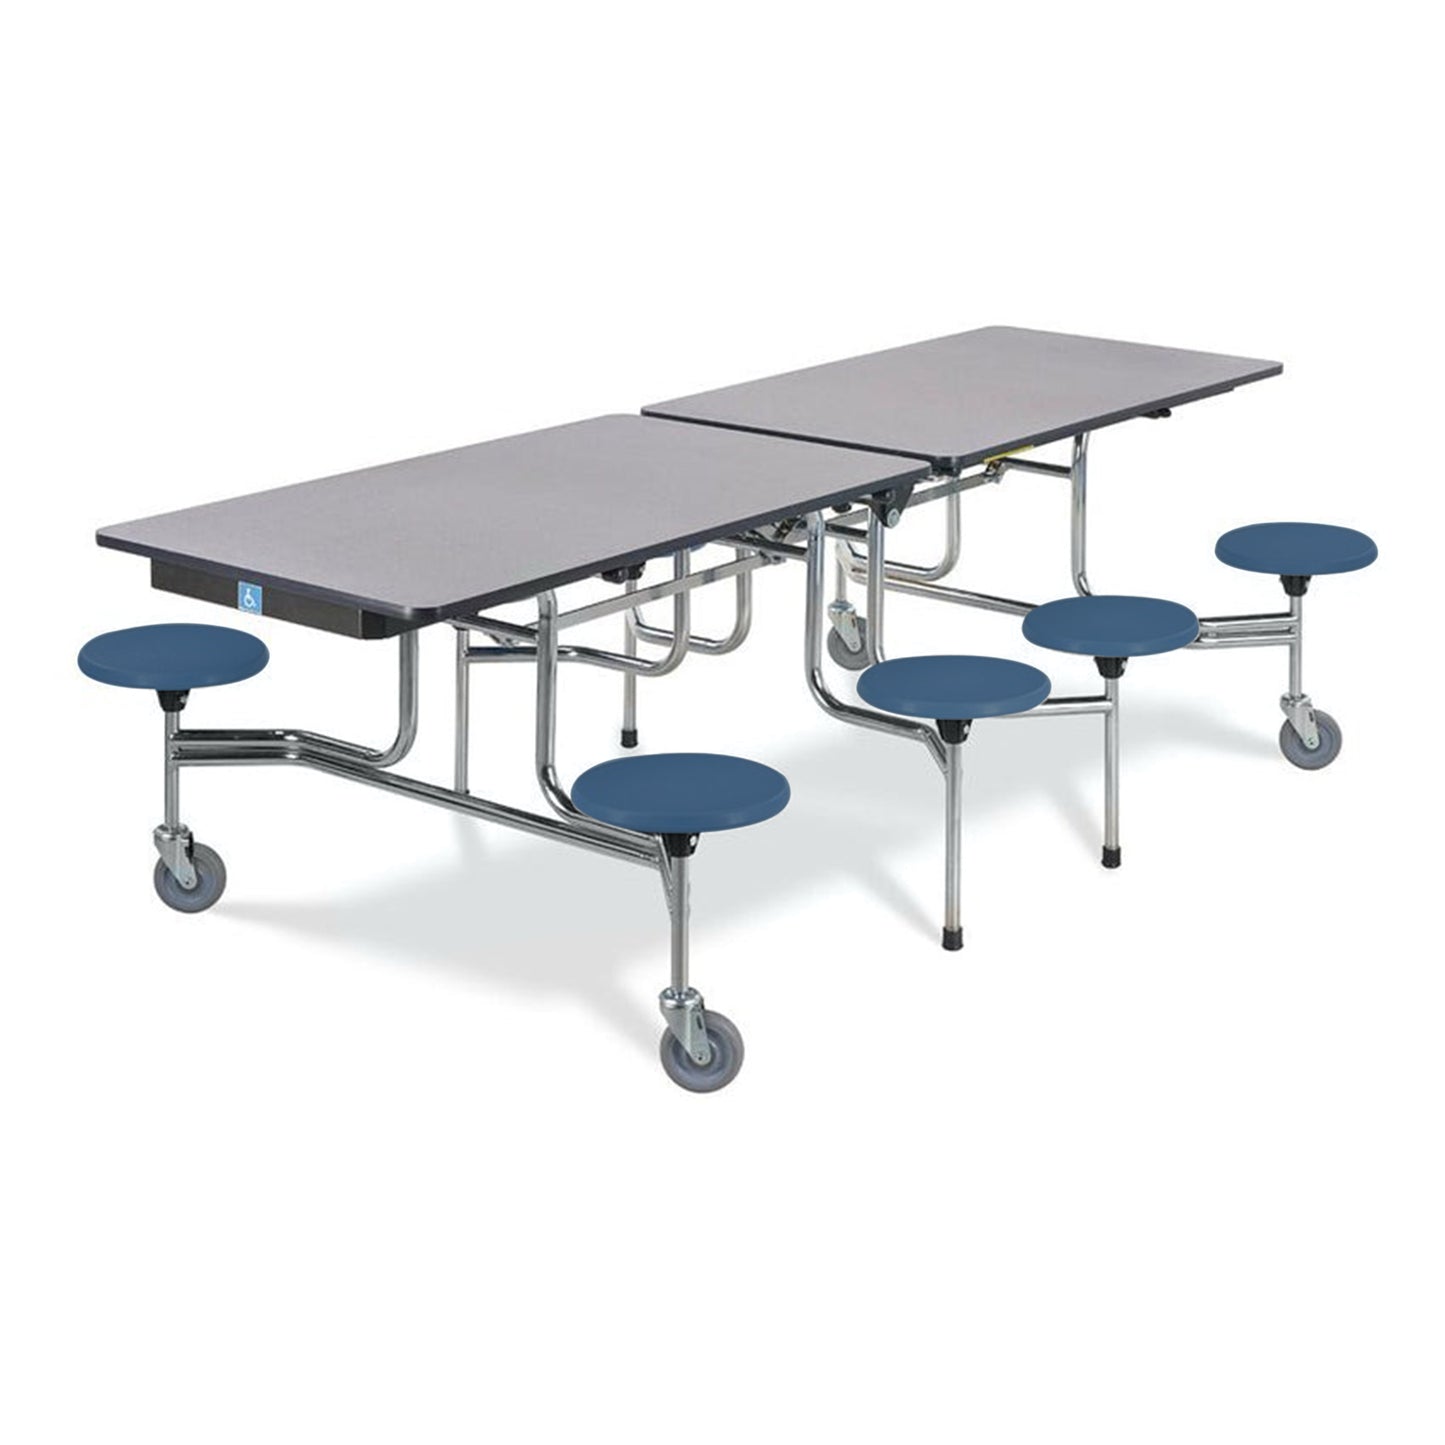 Virco MTS193188W - ADA Compliant Rectangle Mobile Stool Cafeteria Table - T-mold Edge - 19" Seat Height - 8.5'L - 8 Stools